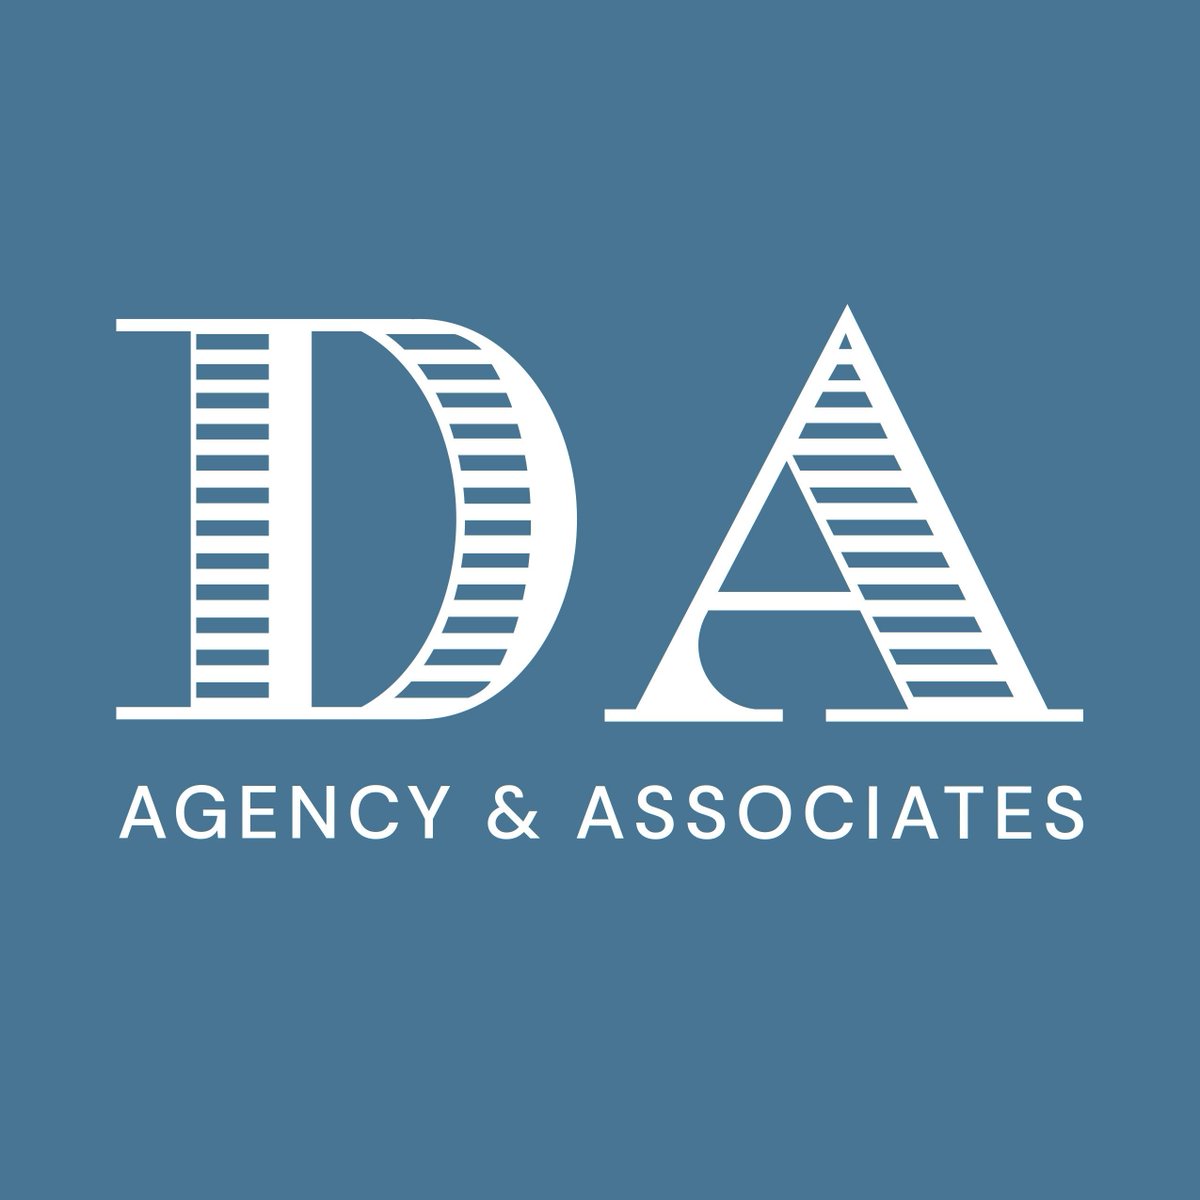 New Job: Assistant to Managing Director and Agent, Camilla Bolton - Darley Anderson Literary, TV & Film Agency London, UK More here: buff.ly/4djEfoC @DA_Agency #PublishingJobs #JobsInBooks